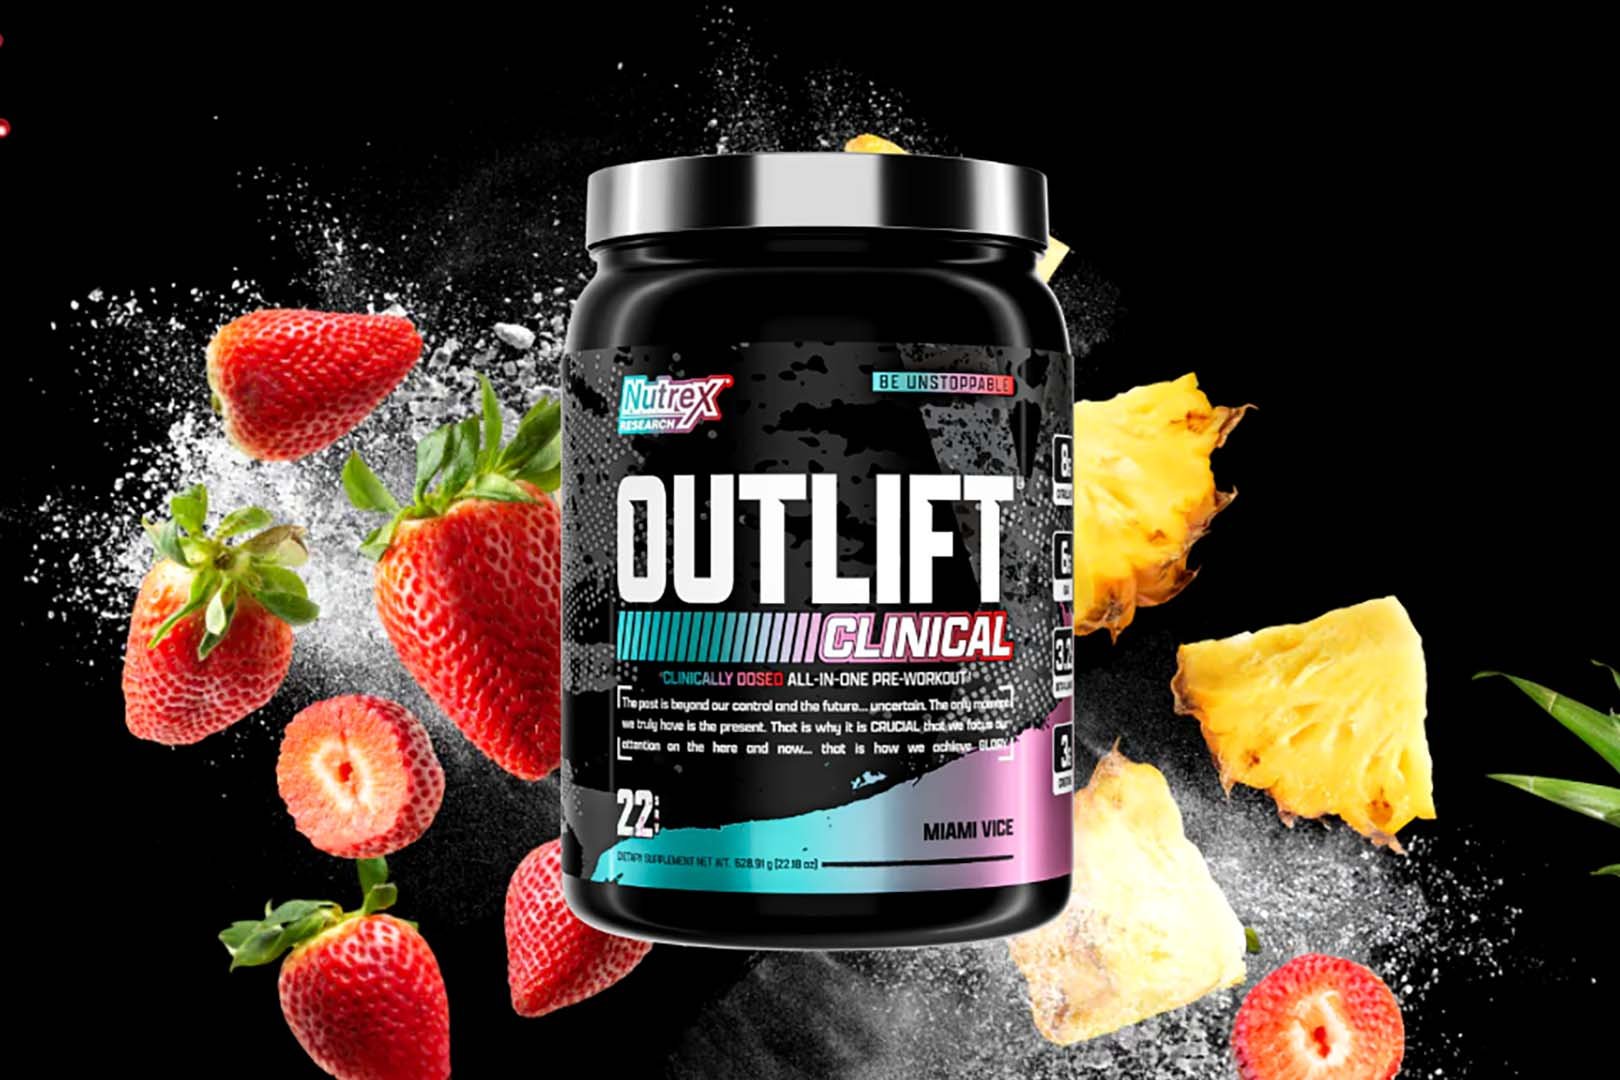 Nutrex And Muscle Strength Outlift Clinical Deal